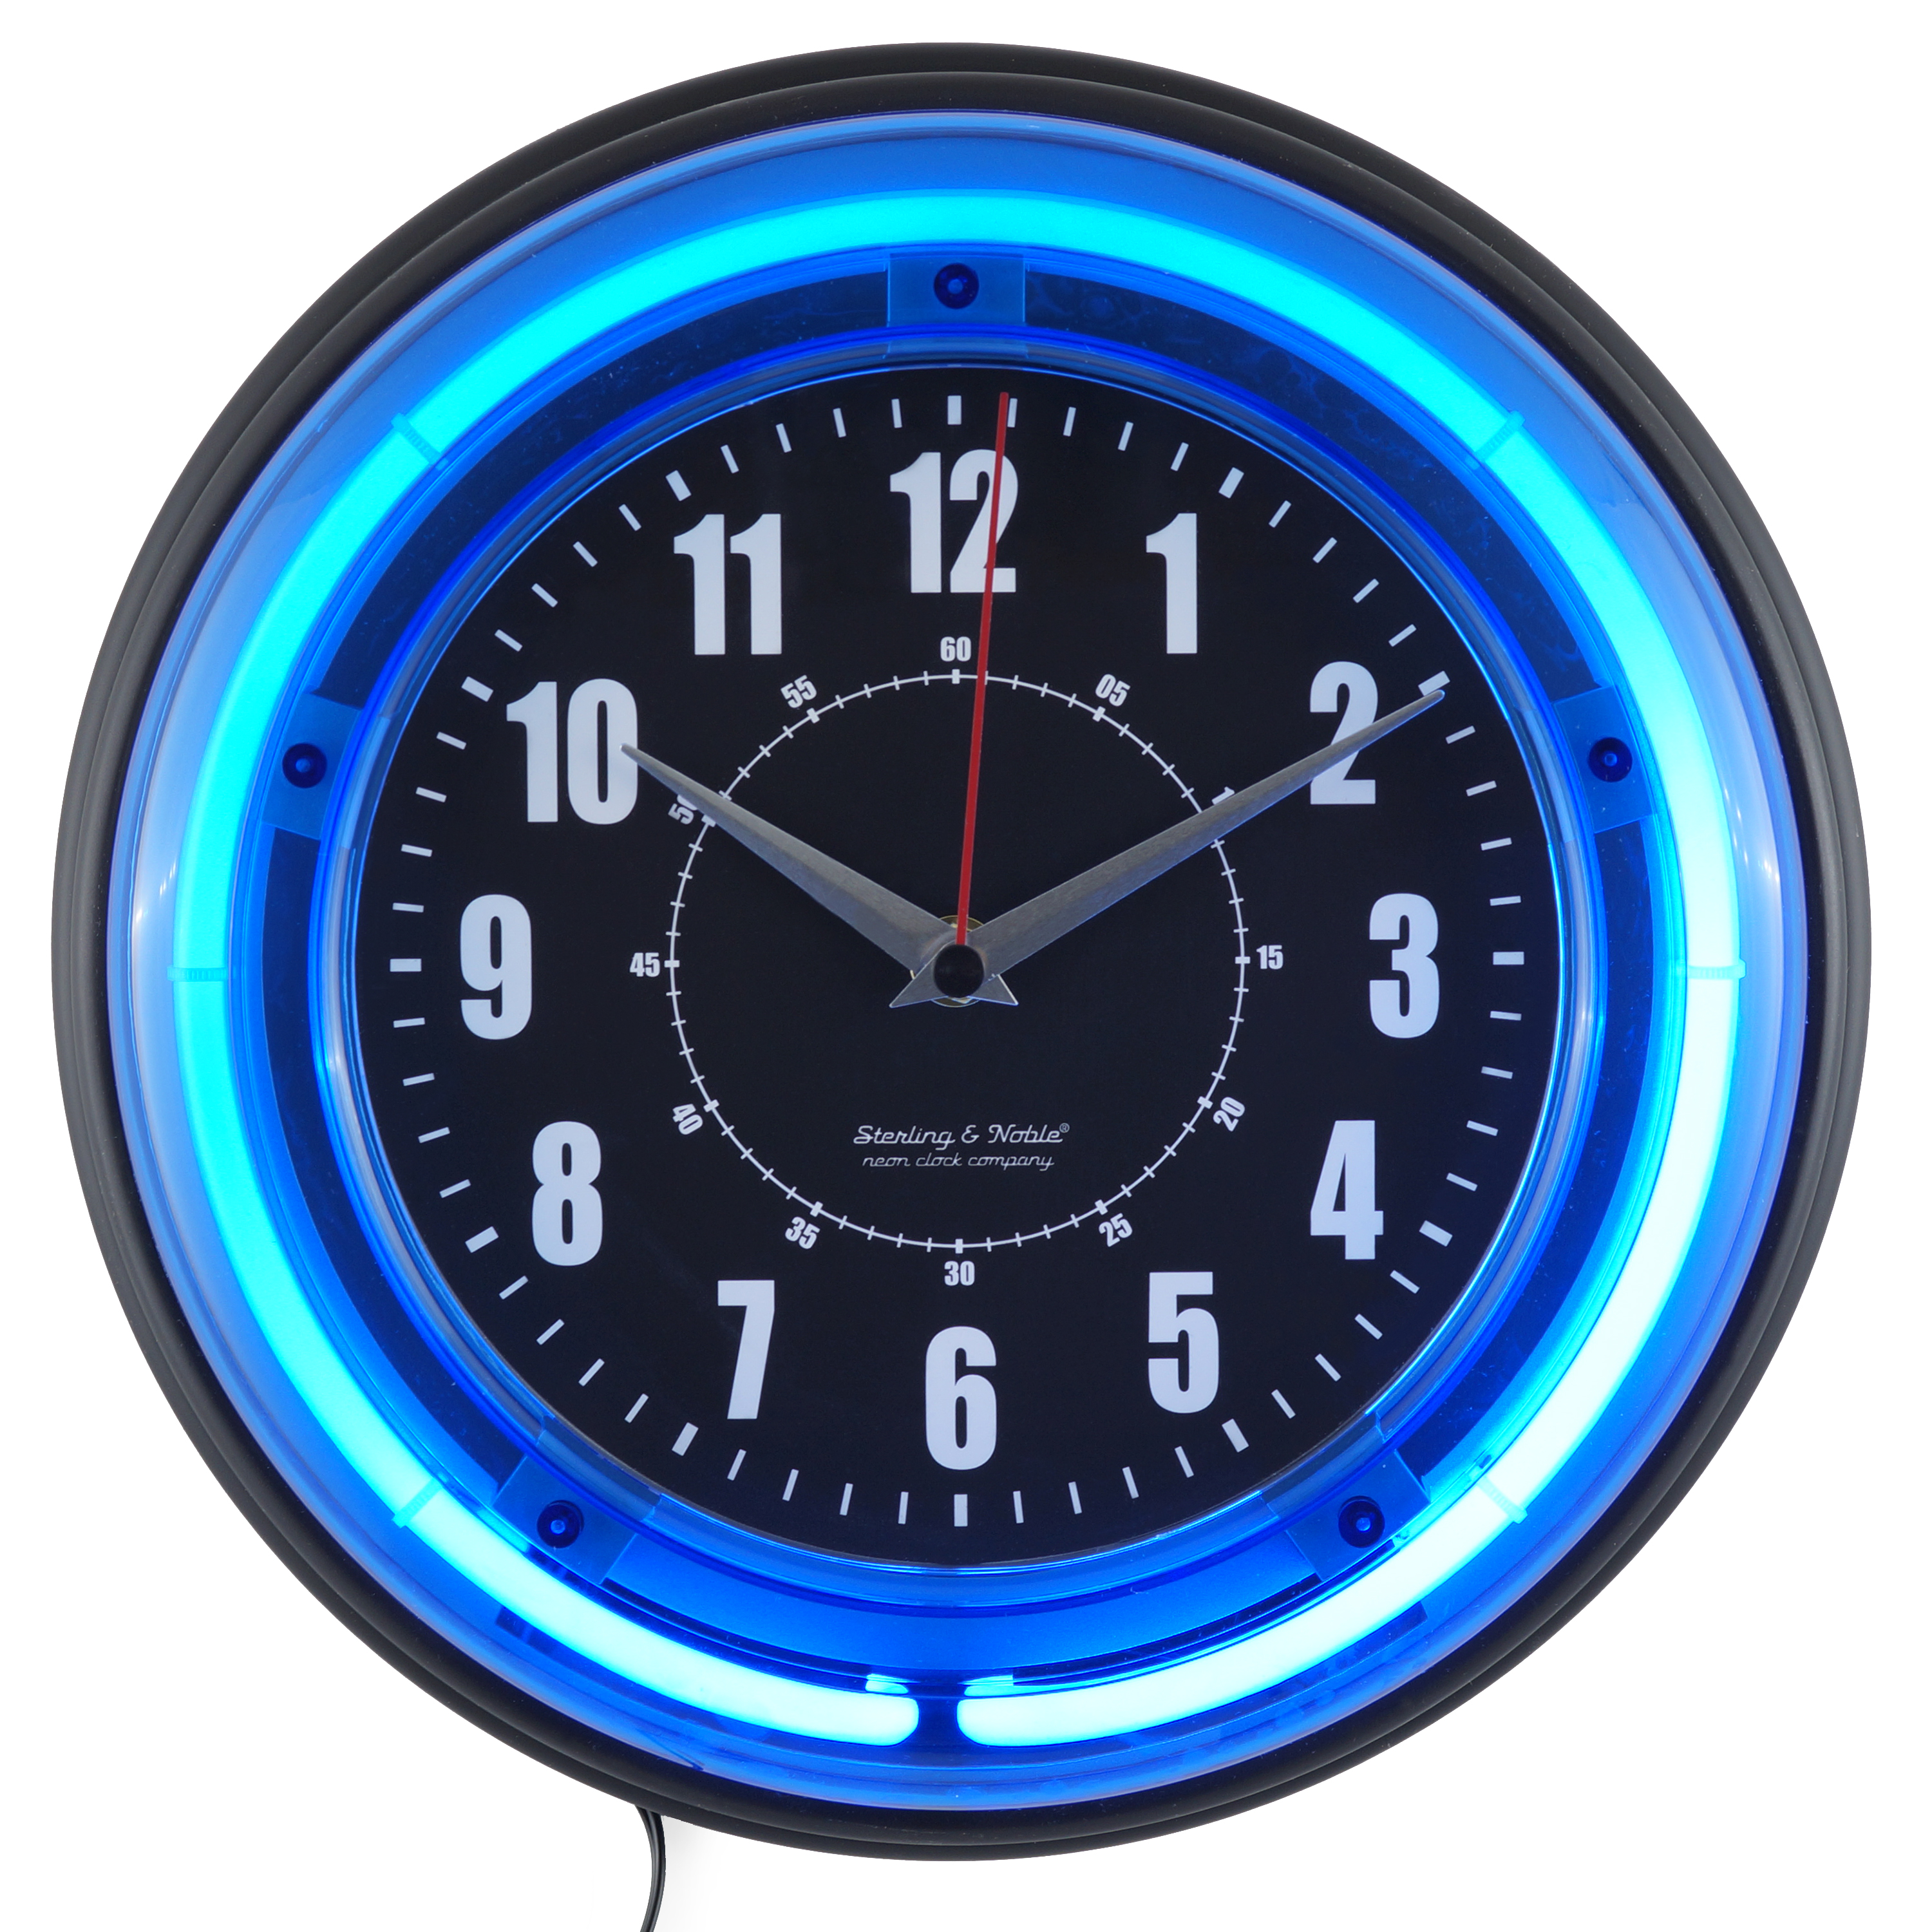 Sterling and Noble 11" Vibrant Blue Neon Analog Wall Clock - image 1 of 10